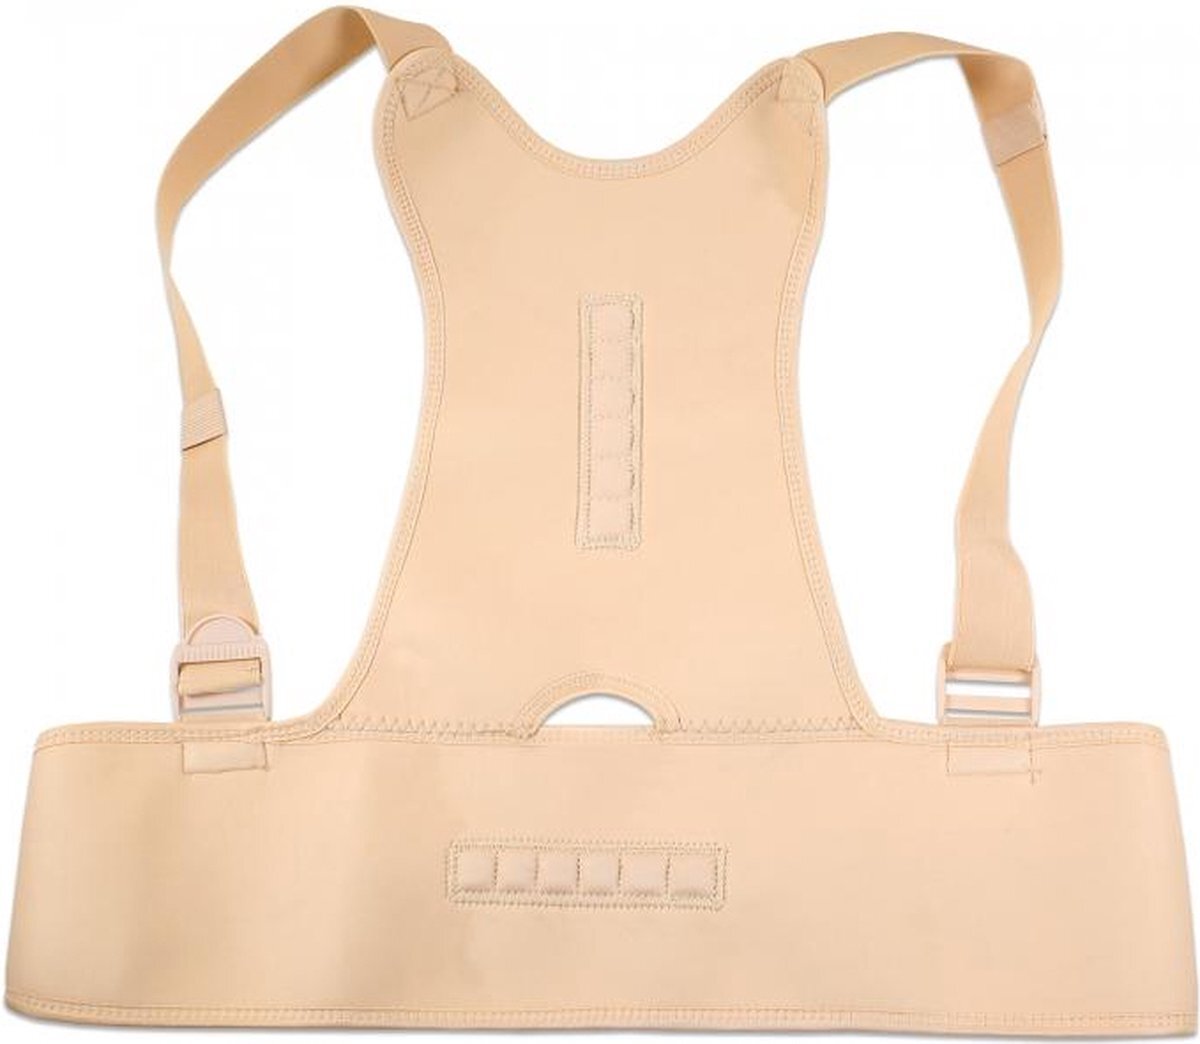 Wellys Wellys®GI-161144: Magnetic Posture Corrector & Back Support-Unisex